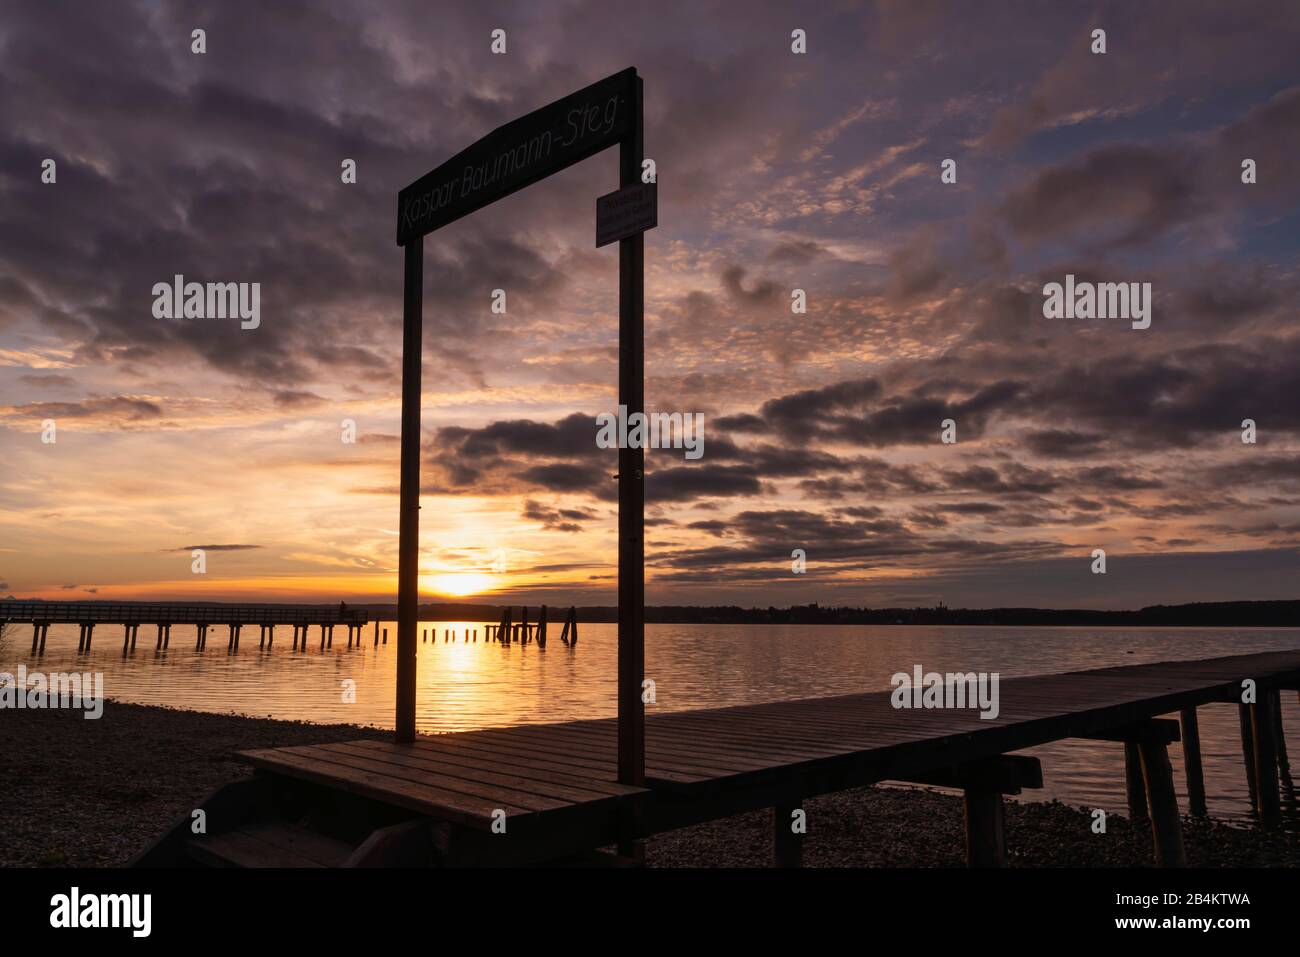 Inning community, Buch am Ammersee, beach, sunset with gate Stock Photo